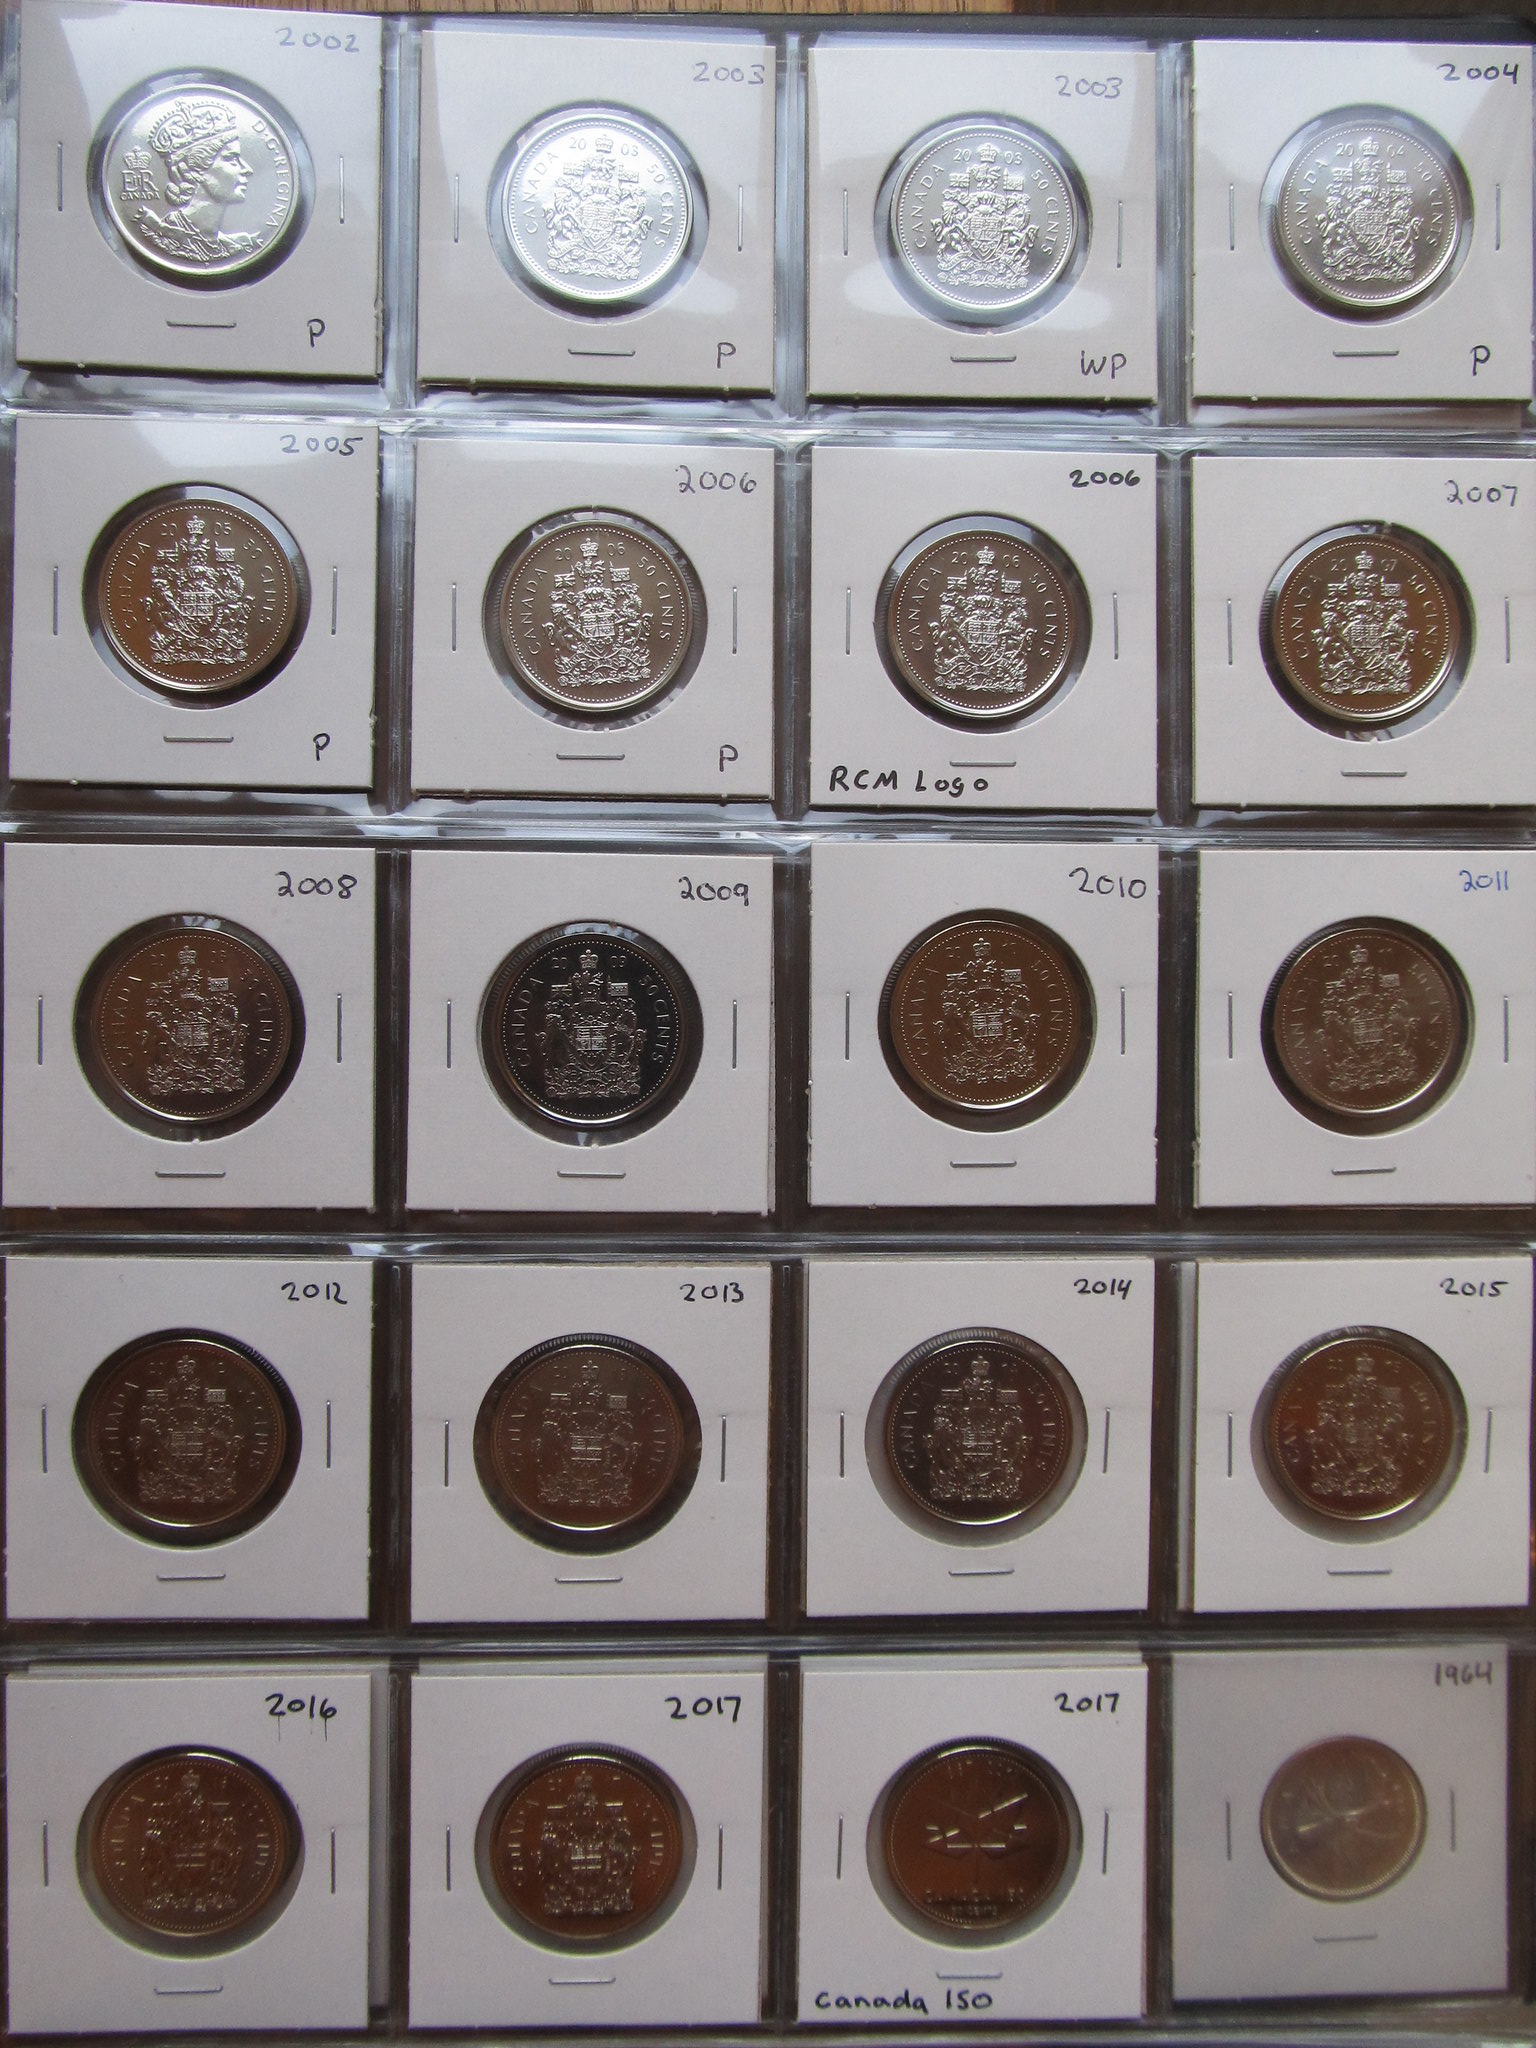 My 50 Cent Collection! - Coin Community Forum